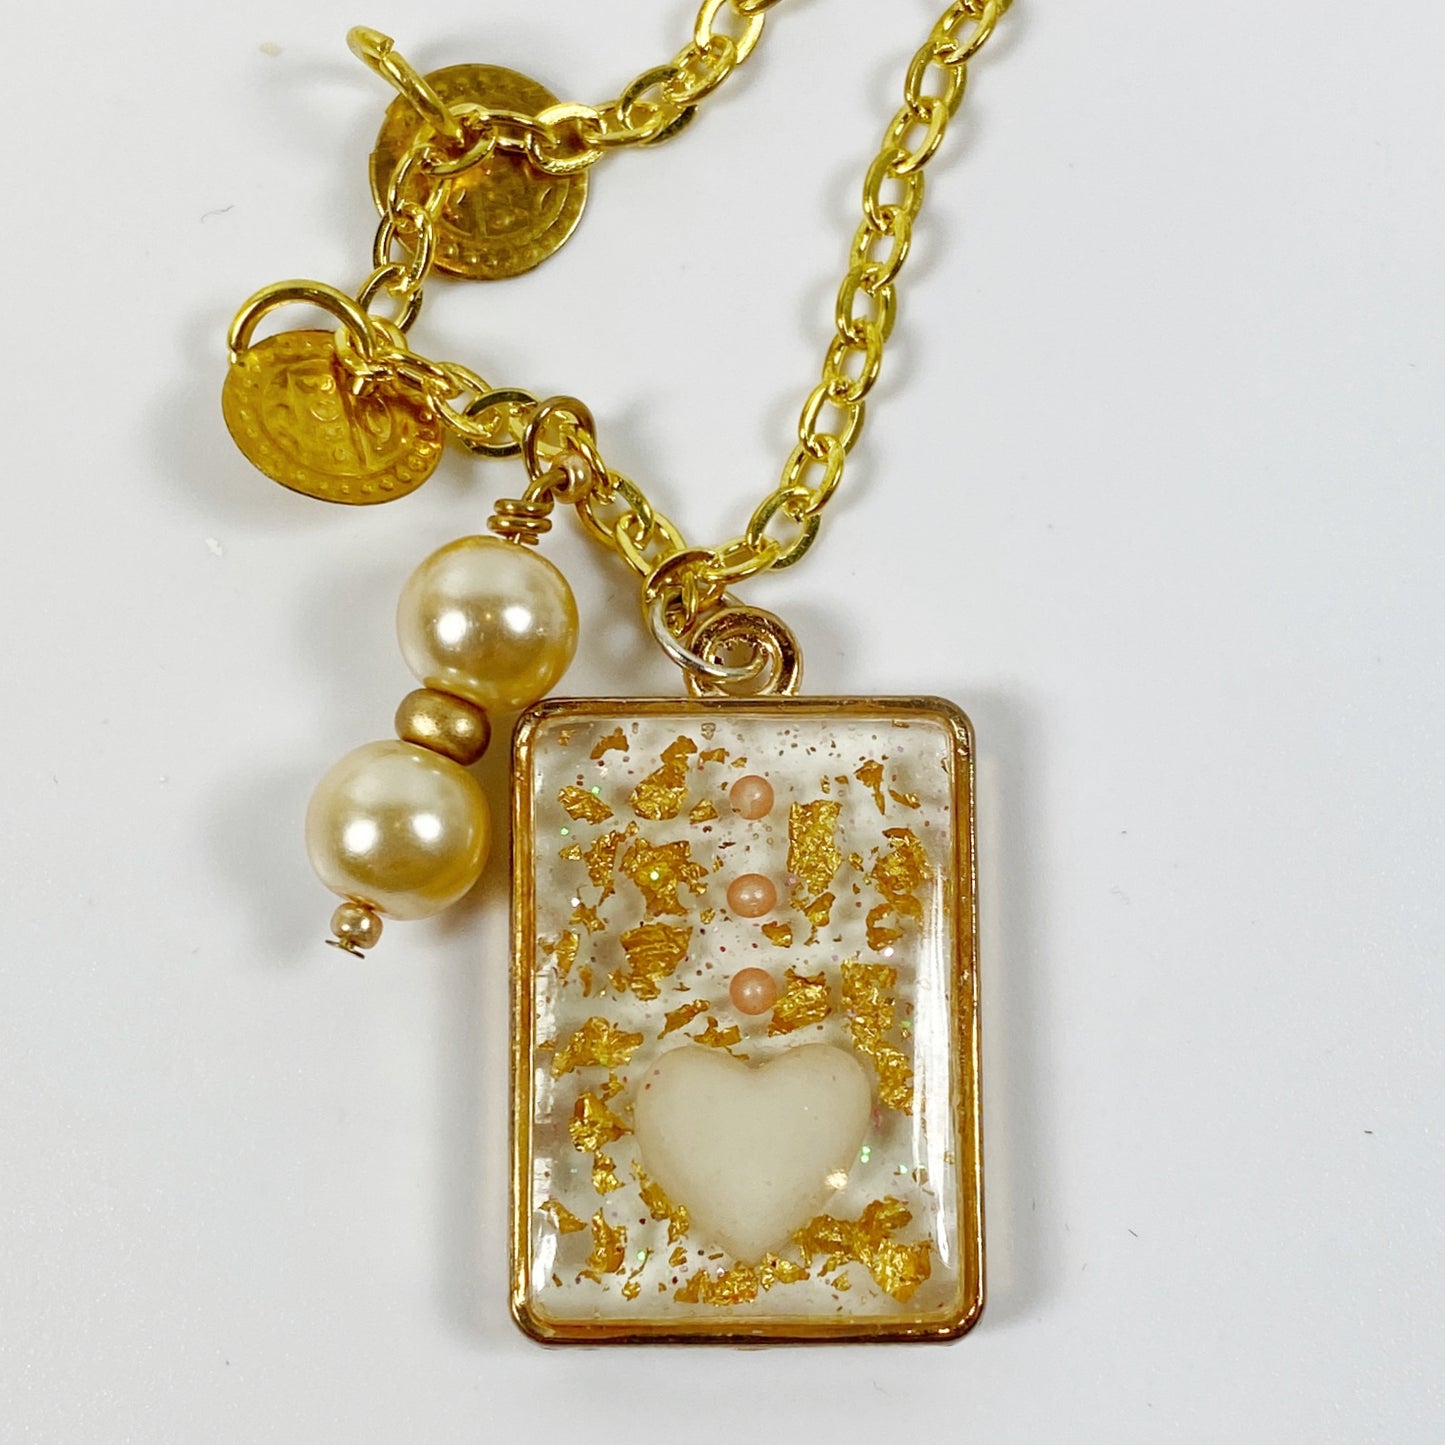 White Heart in Gold Leaf Resin Pendent Necklace with Pearls close up